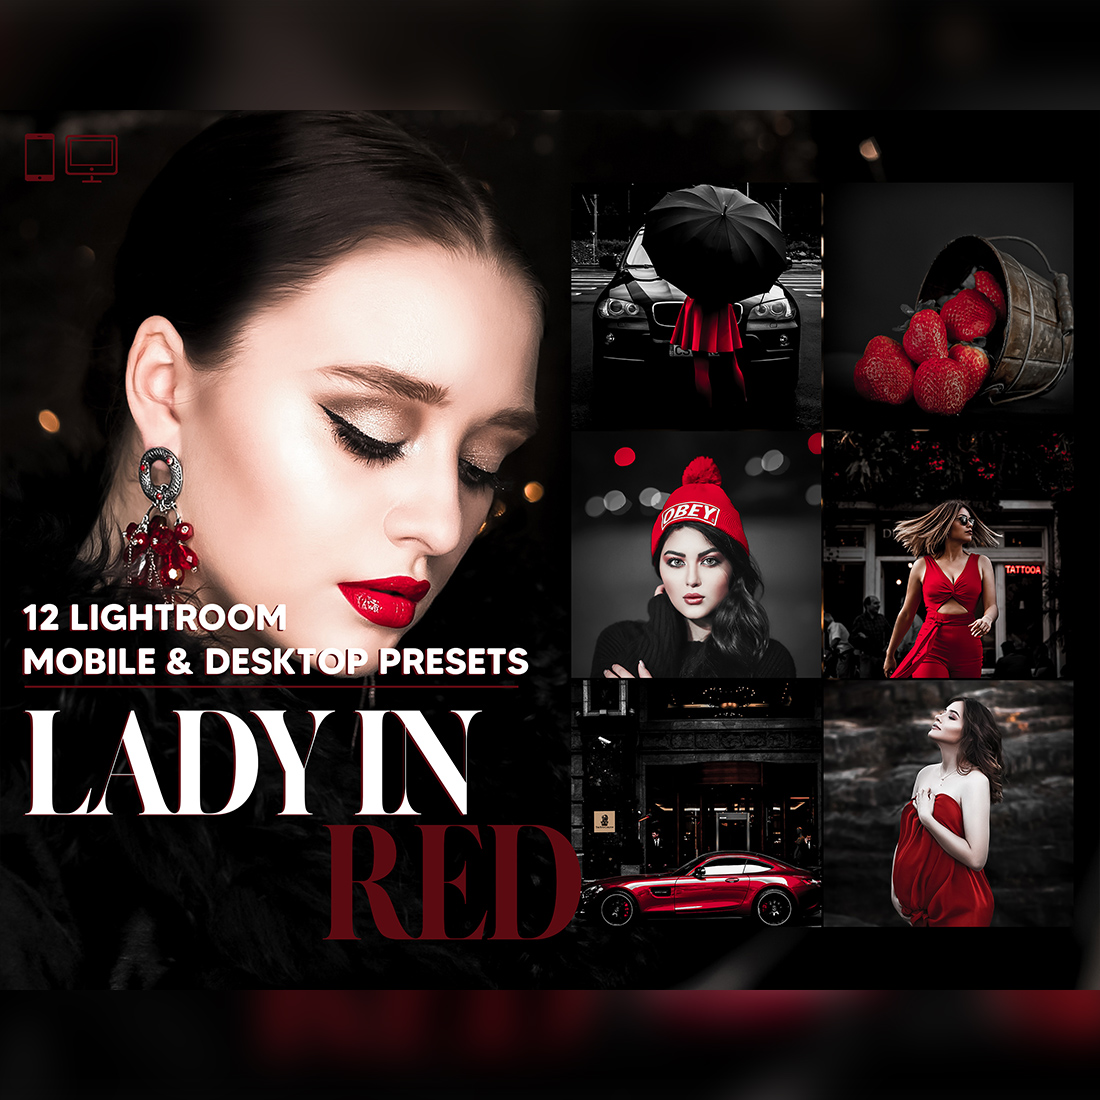 12 Lady In Red Lightroom Presets, Monochrome Mobile Preset, Women In Color Desktop, Blogger, DNG Lifestyle And Portrait Theme For Instagram cover image.